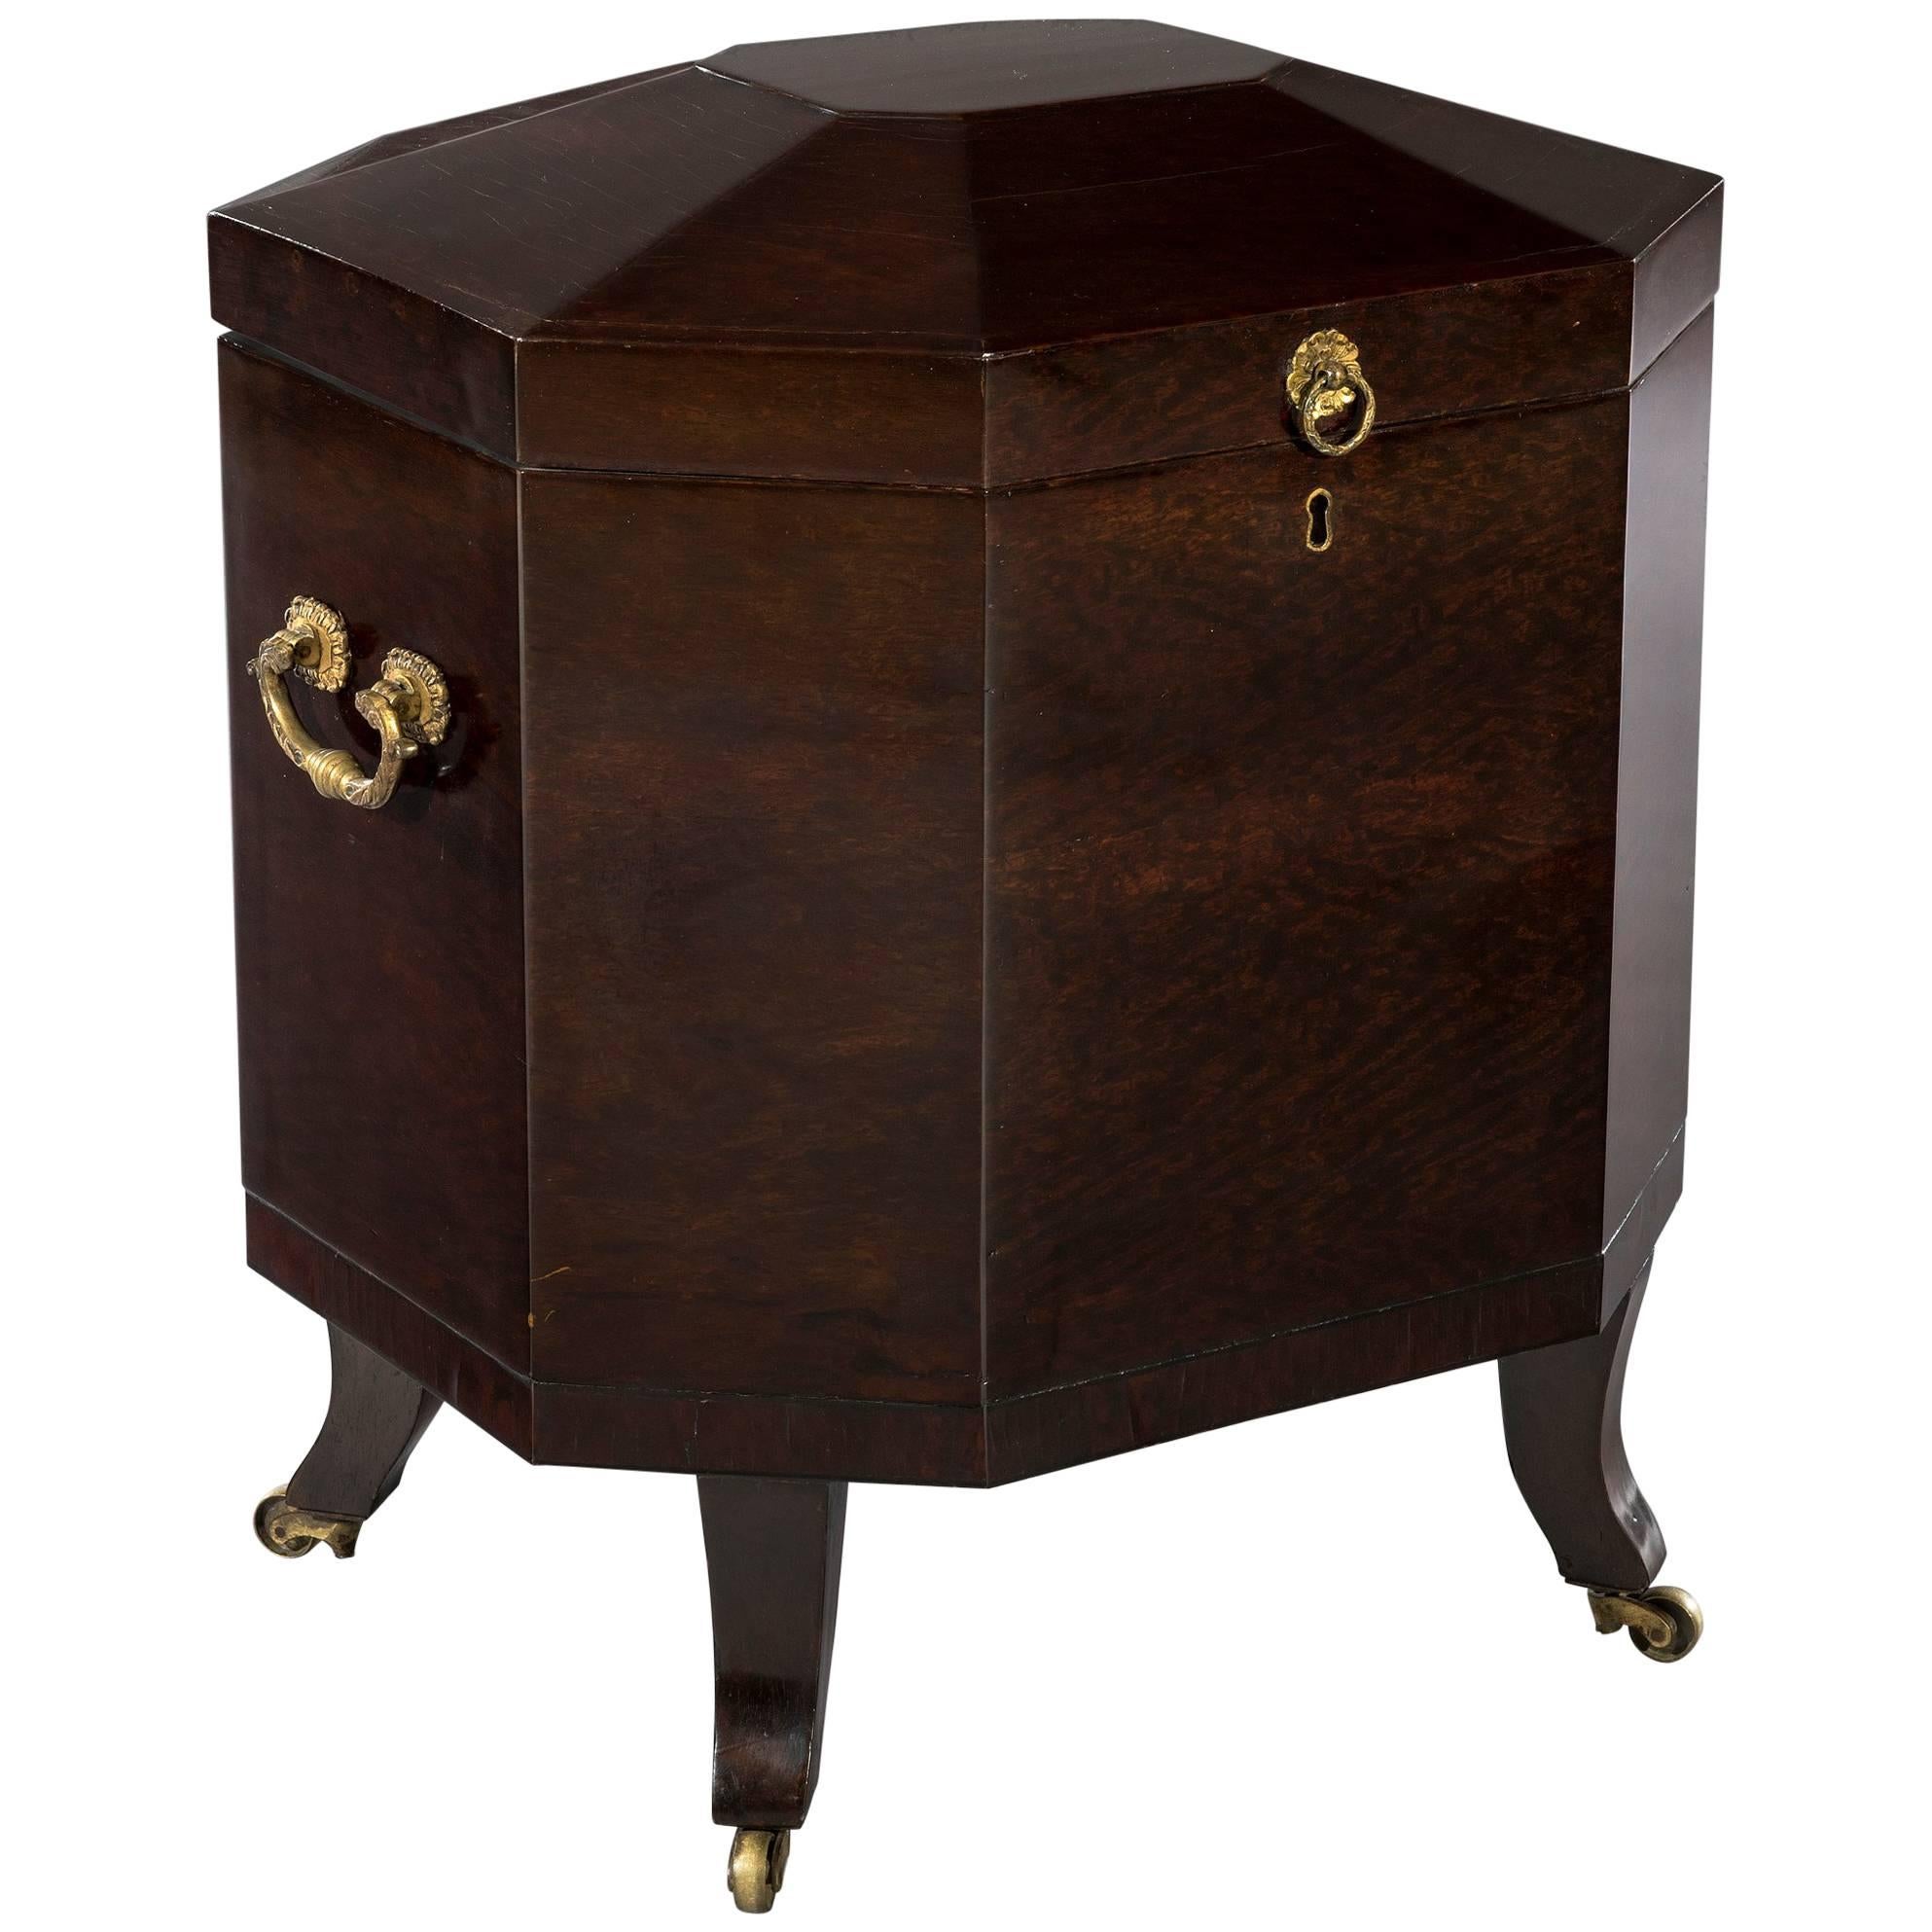 Early 19th Century RARE Regency Period Octagonal Partridgewood Wine Cellaret For Sale